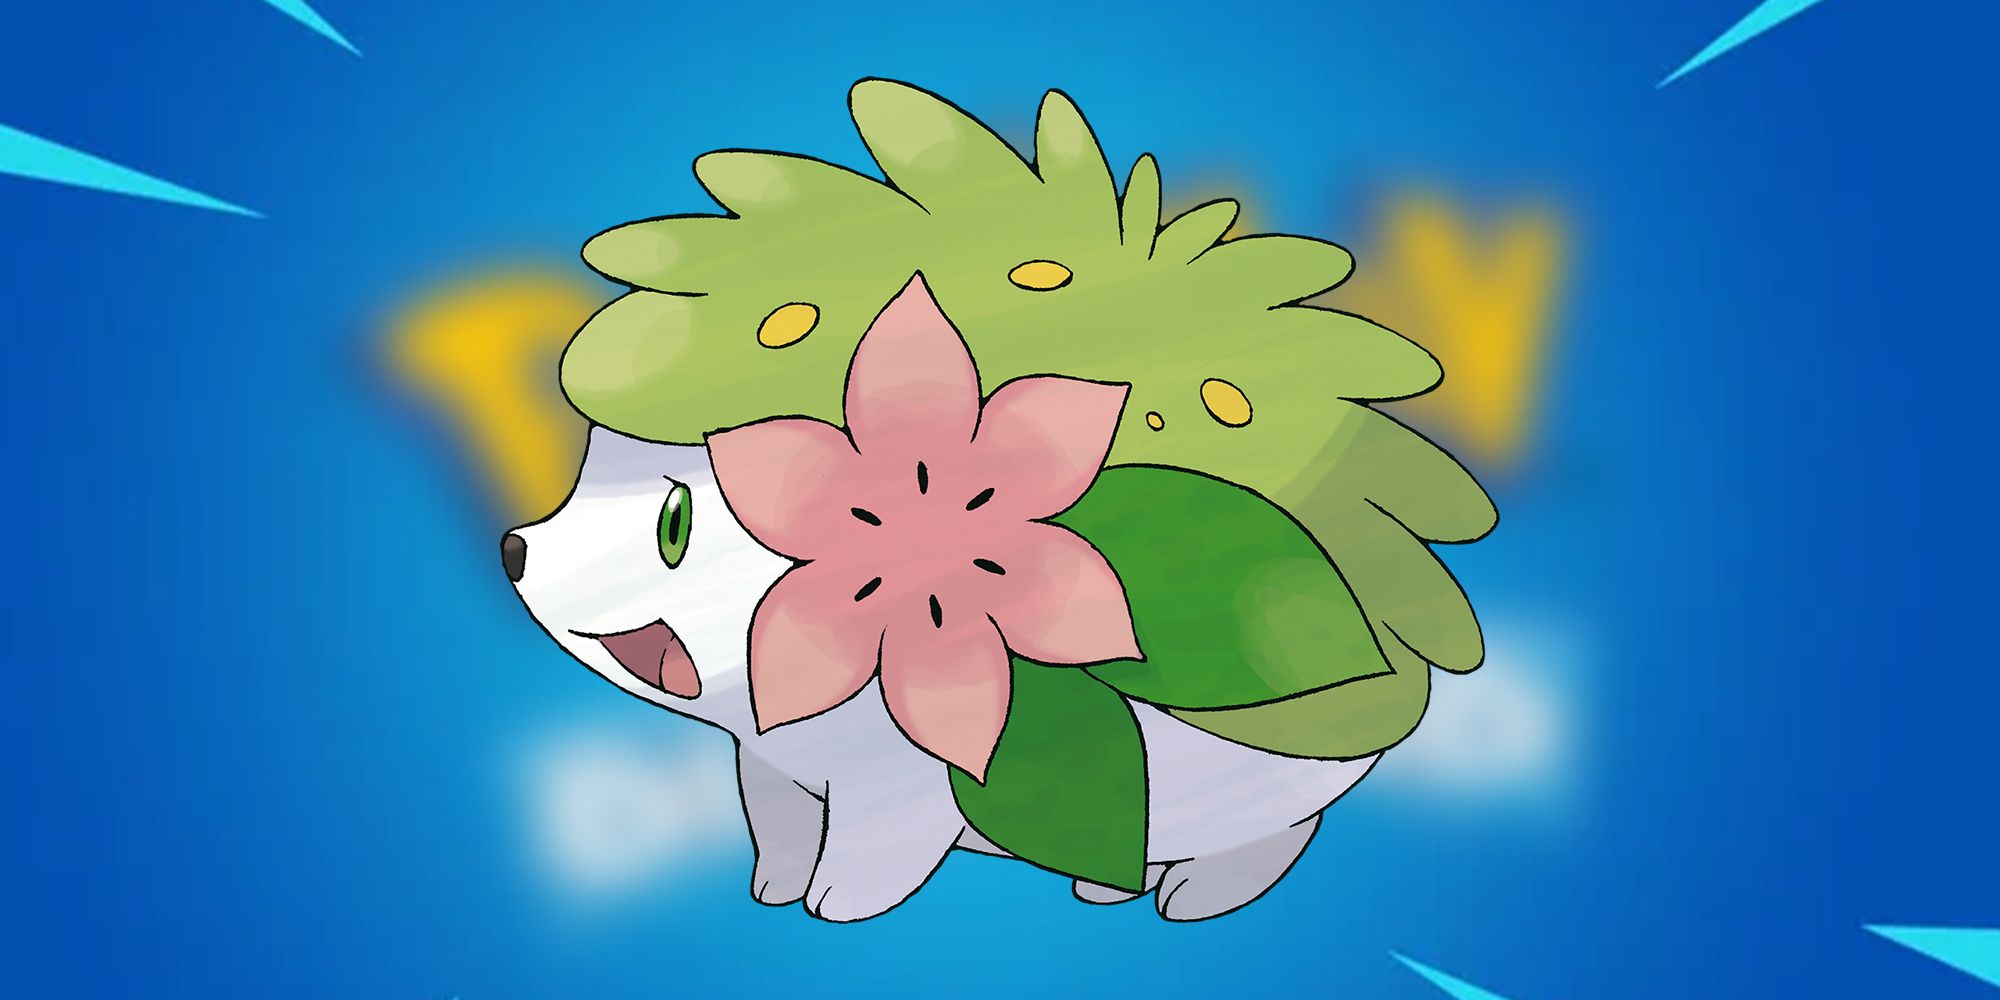 pok-mon-bdsp-how-to-find-catch-shaymin-early-screen-rant